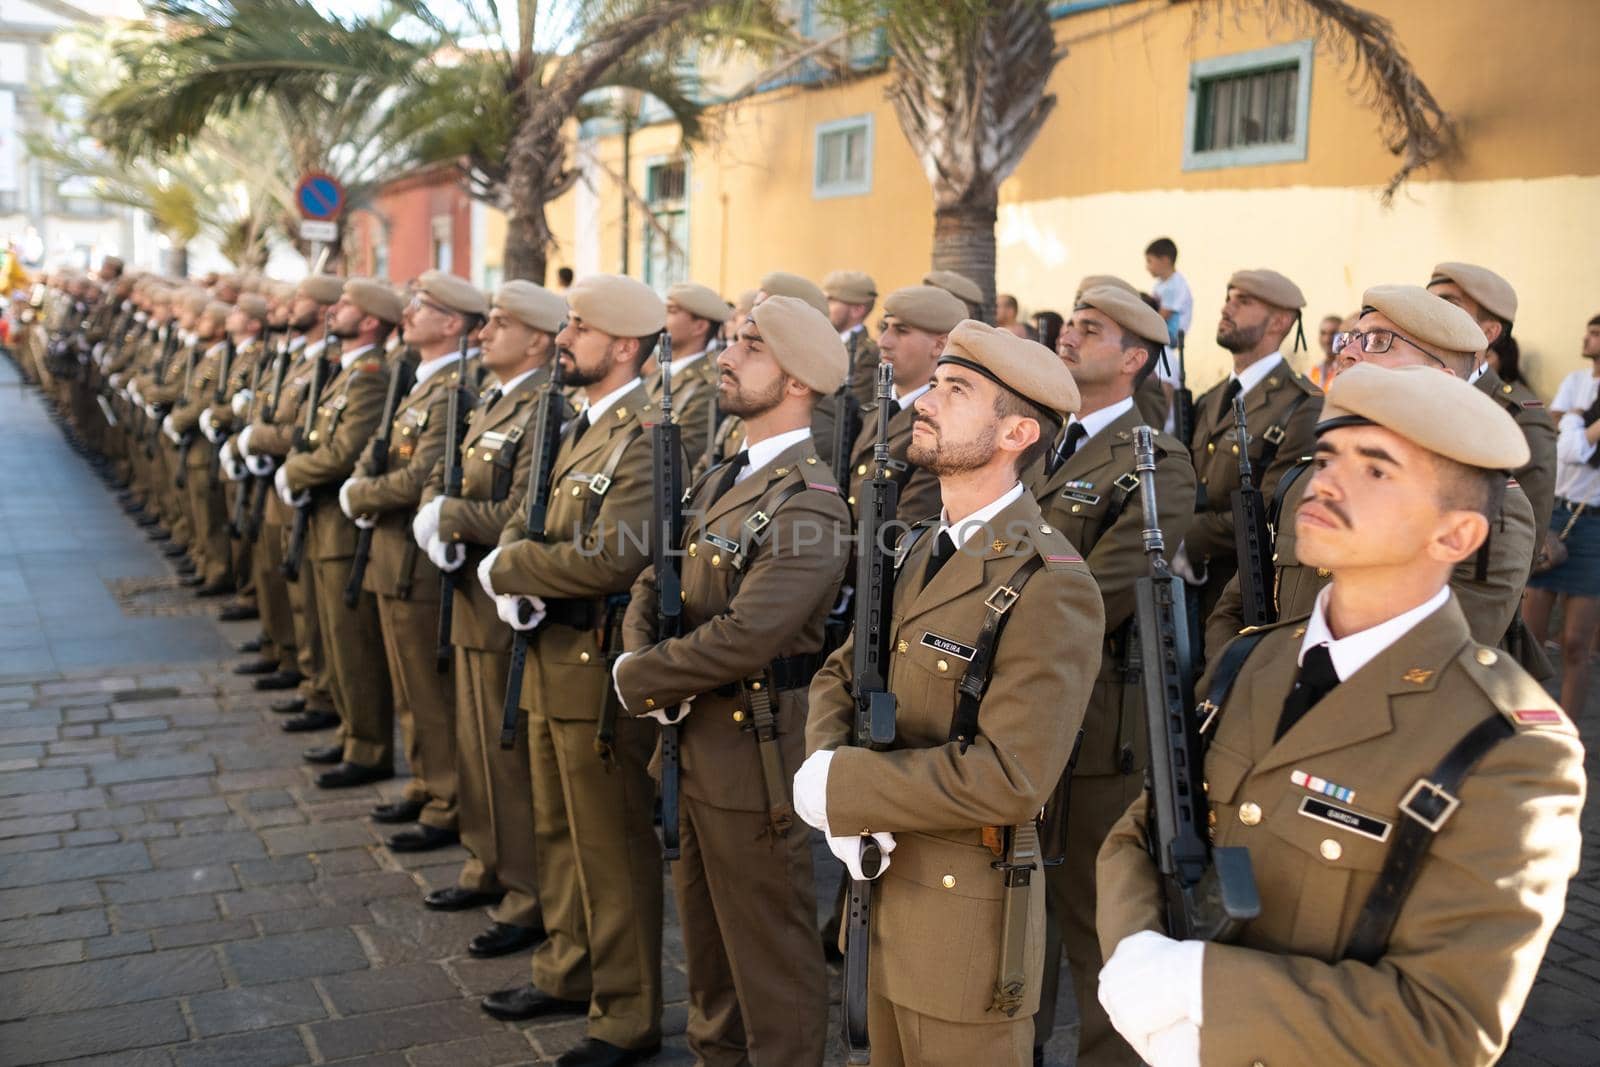 July 25, 2019. A guard of honor greets a guest in the City of Santa Cruz de Tenerife. Canary Islands, Spain by Lobachad